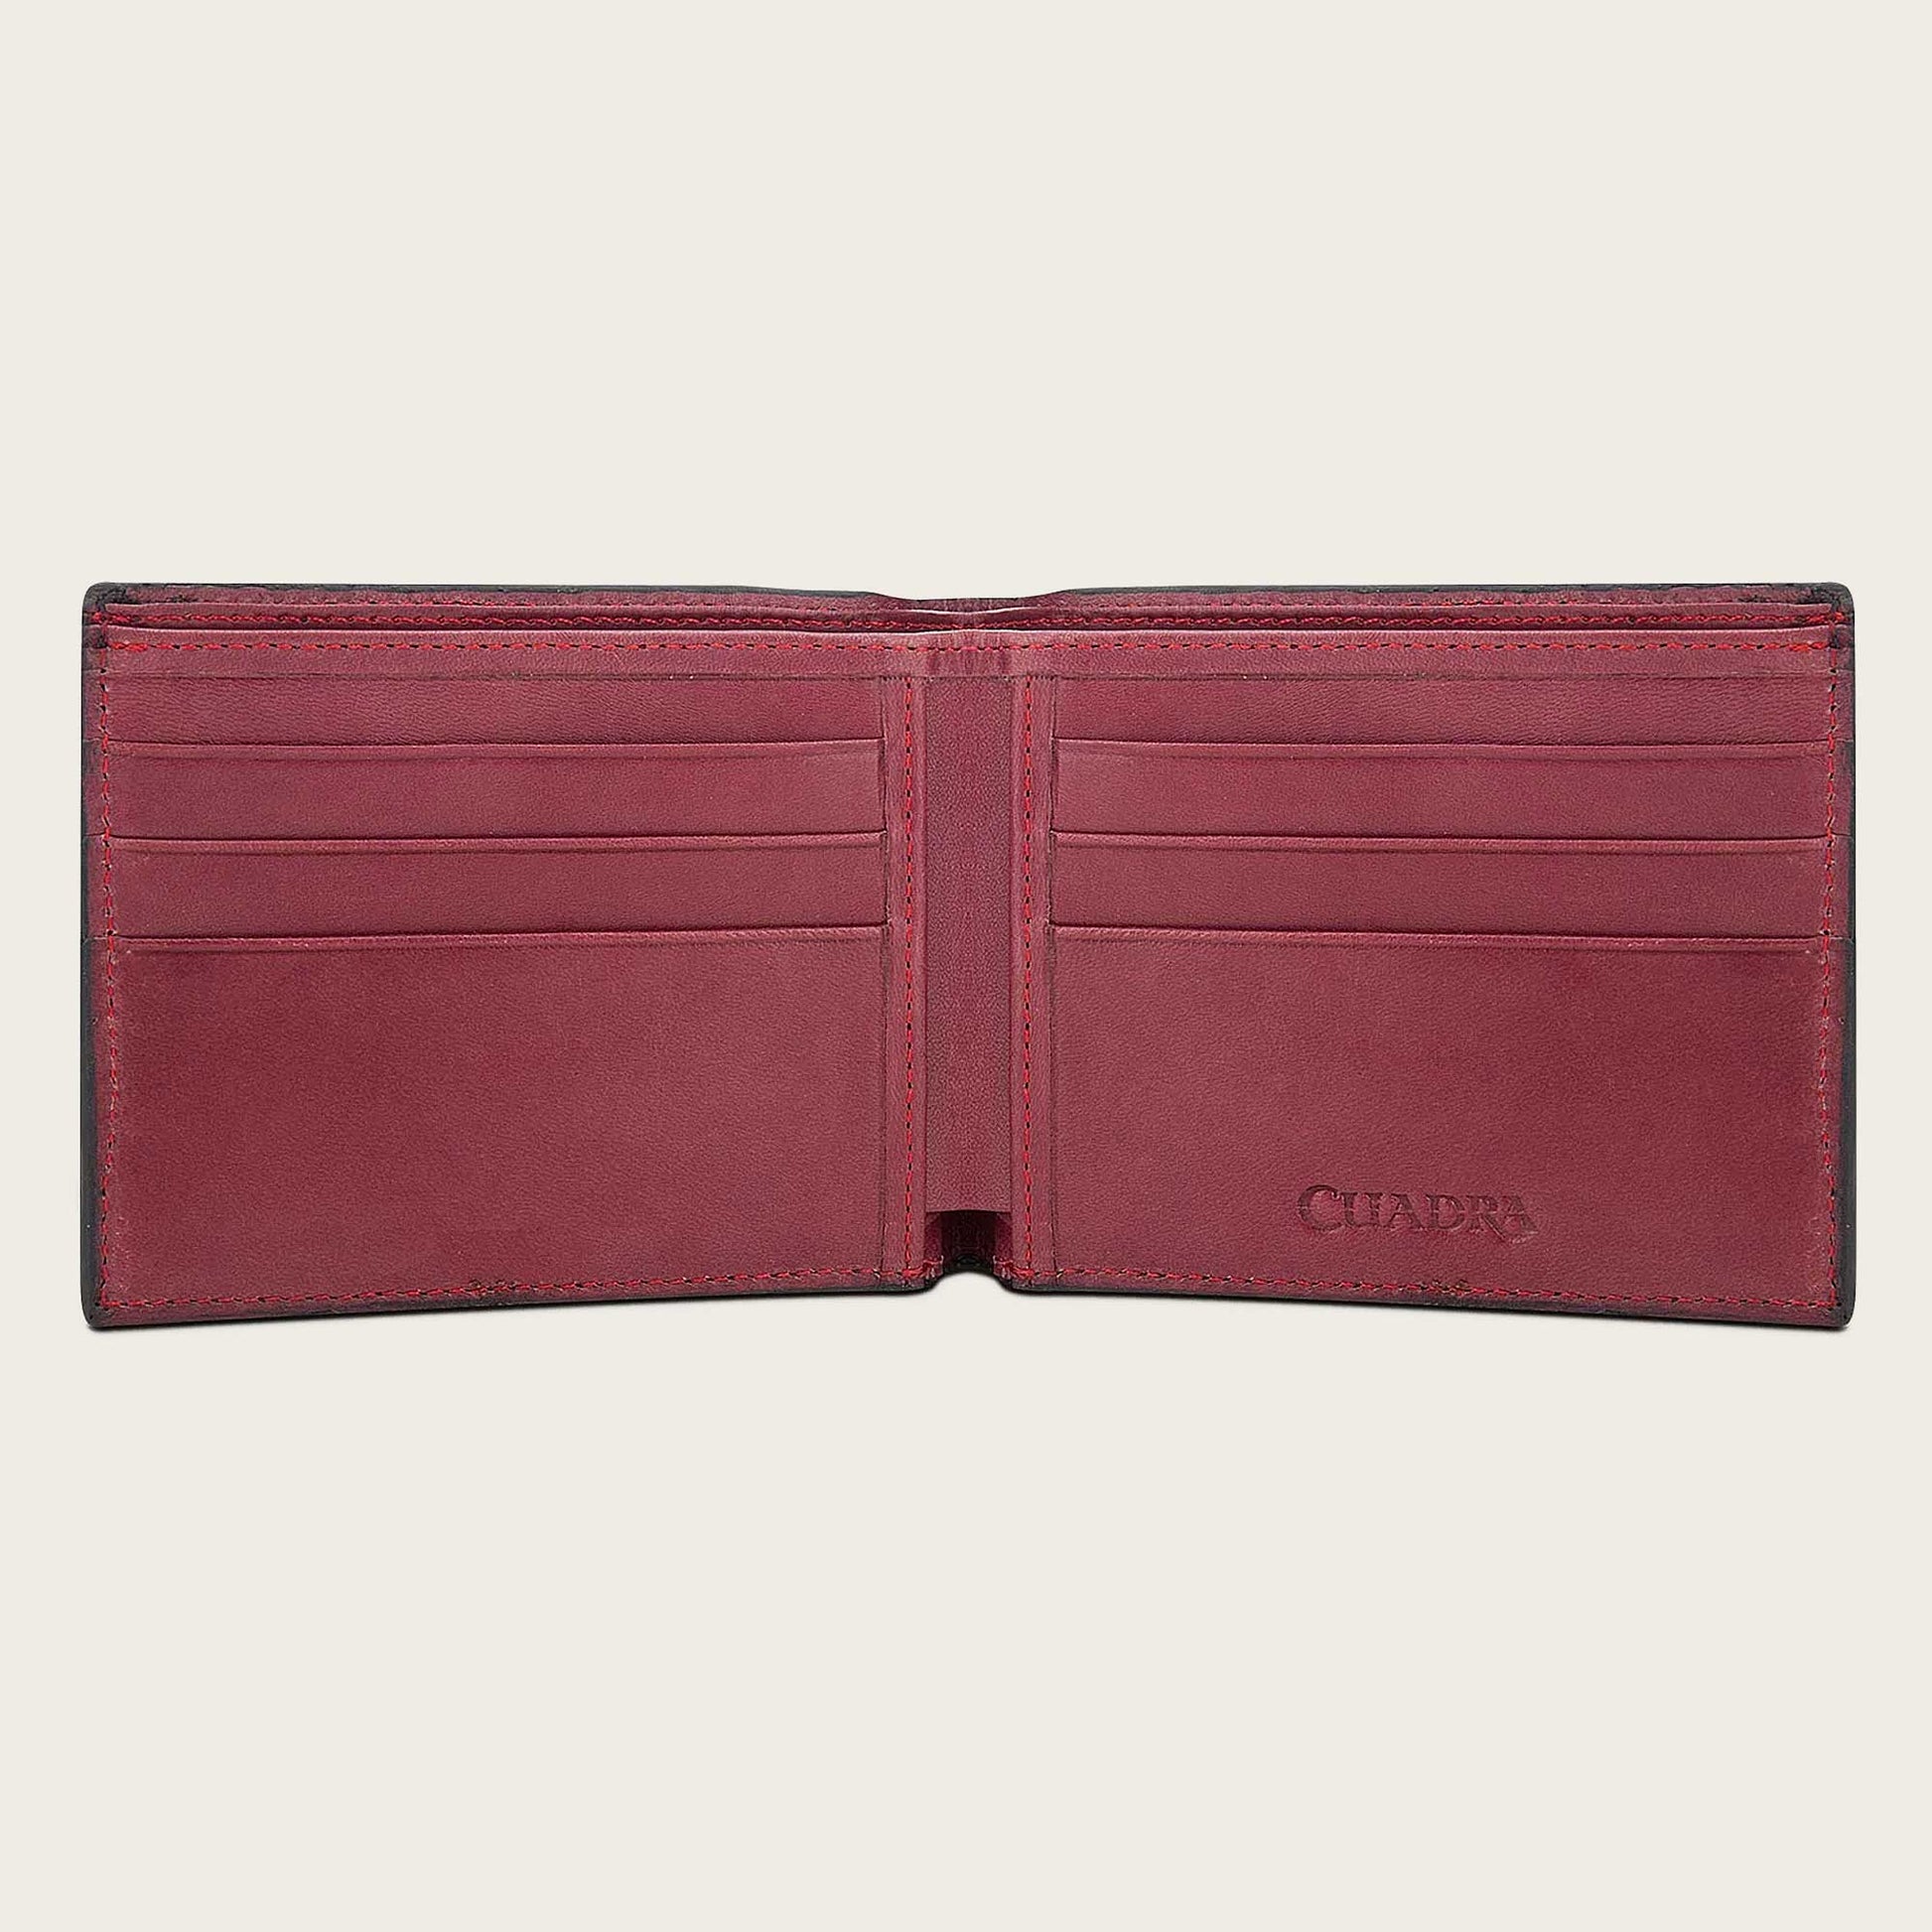 It has six card slots, all made from high-quality cowhide leather. You'll have enough room for all your important cards, like credit cards and IDs.